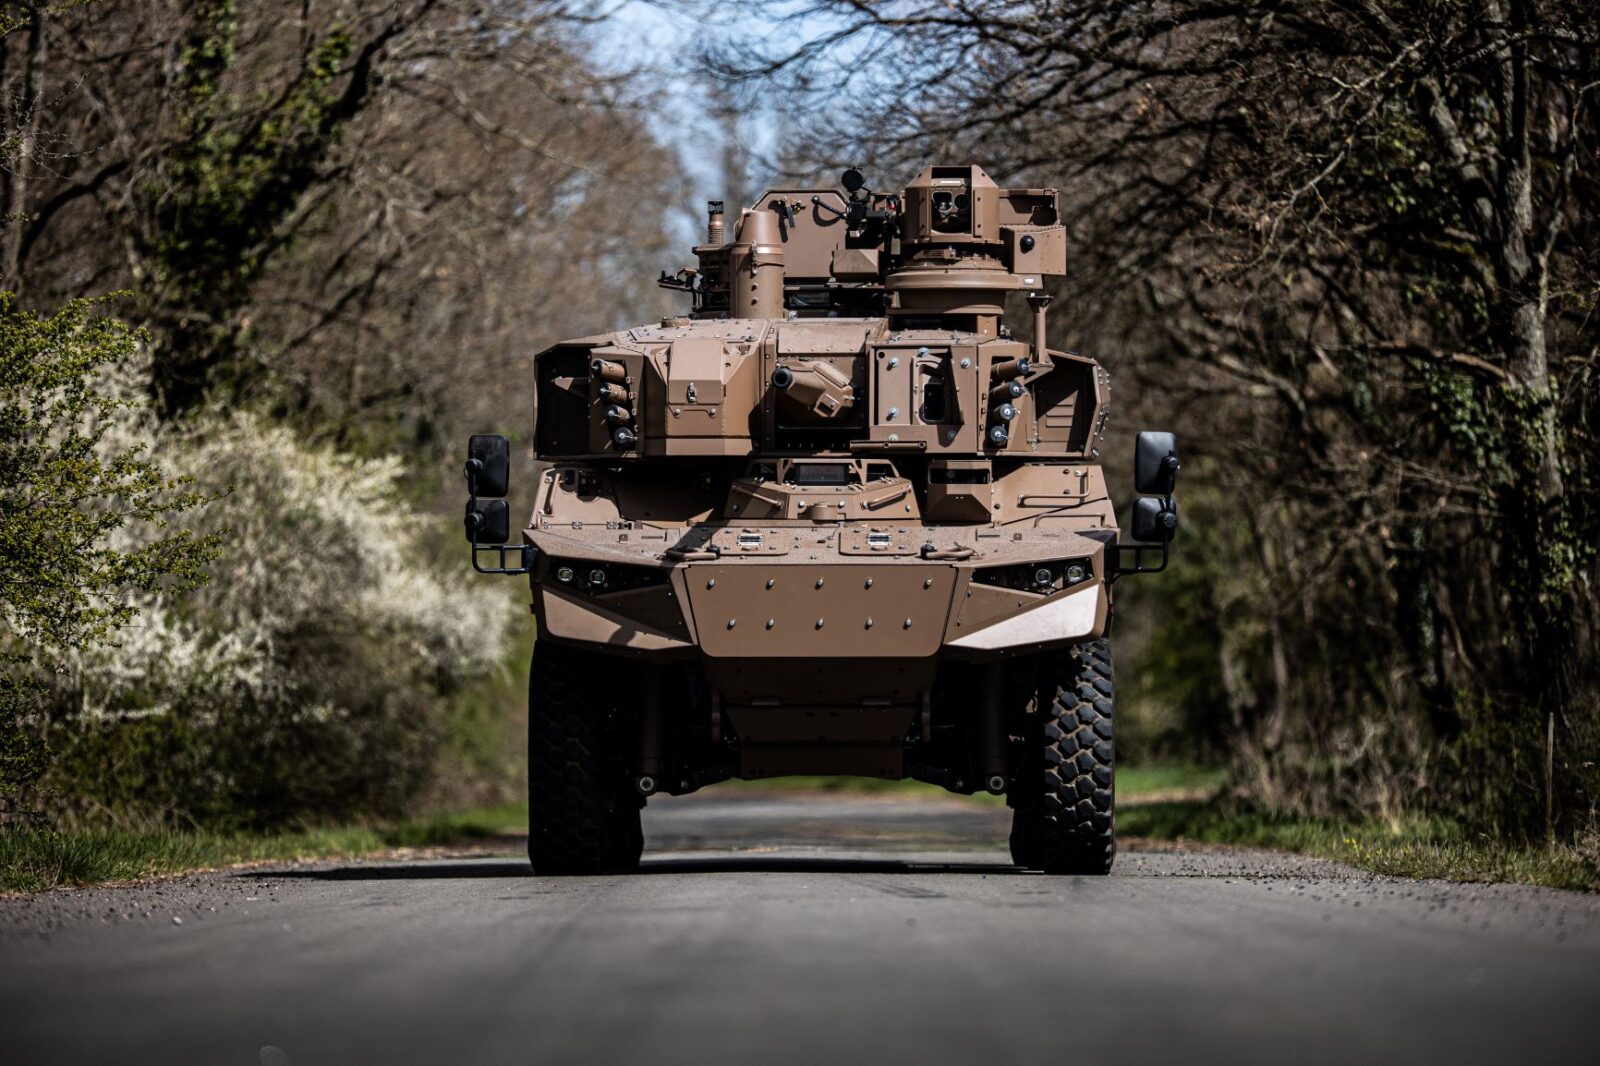 The temporary company grouping (Groupement Momentané d'Entreprises, GME) multi-role armoured vehicle (engin blindé multi rôles, EBMR), including Nexter, a KNDS company, Thales and Arquus, delivered, this year, 123 GRIFFON and 22 JAGUAR vehicles to the Directorate General of Armaments (Direction générale de l’armement, DGA), the French Defence Procurement Agency.